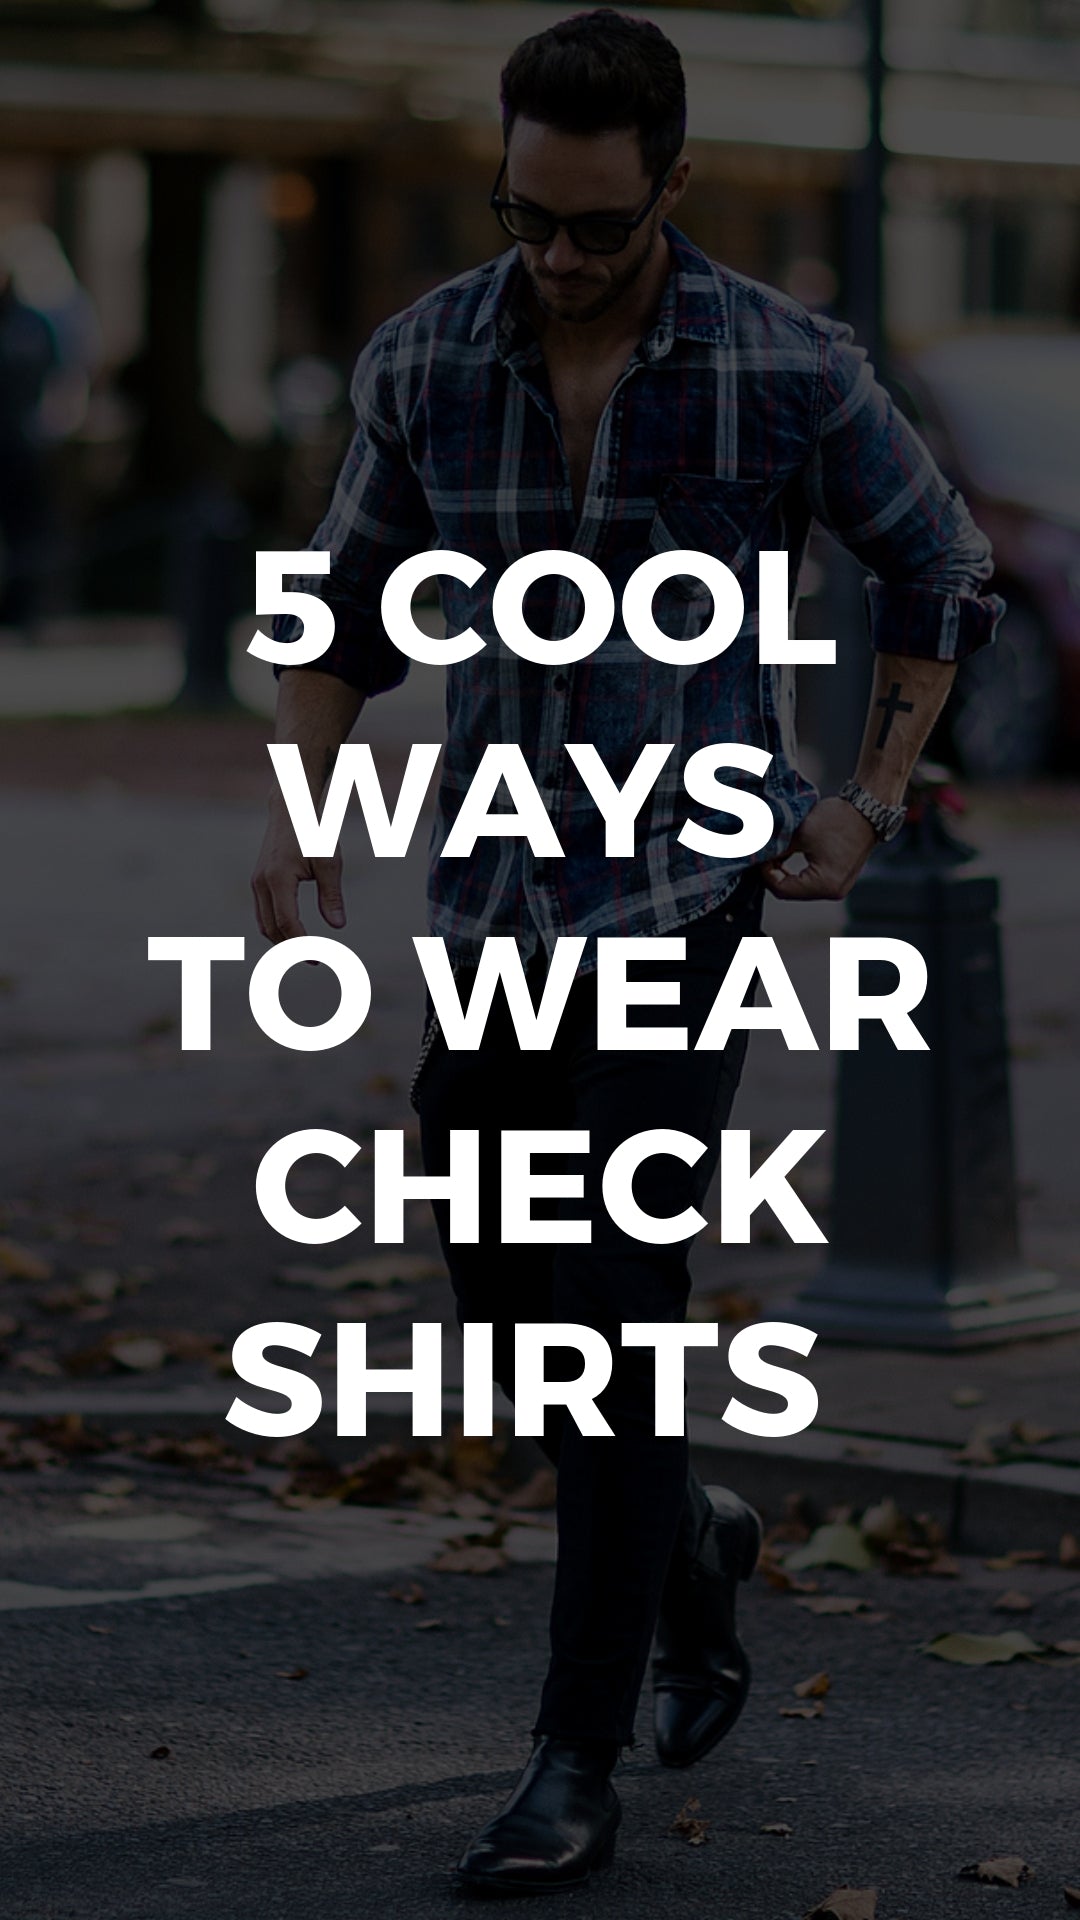 5 Check Shirt Outfits For Men – LIFESTYLE BY PS